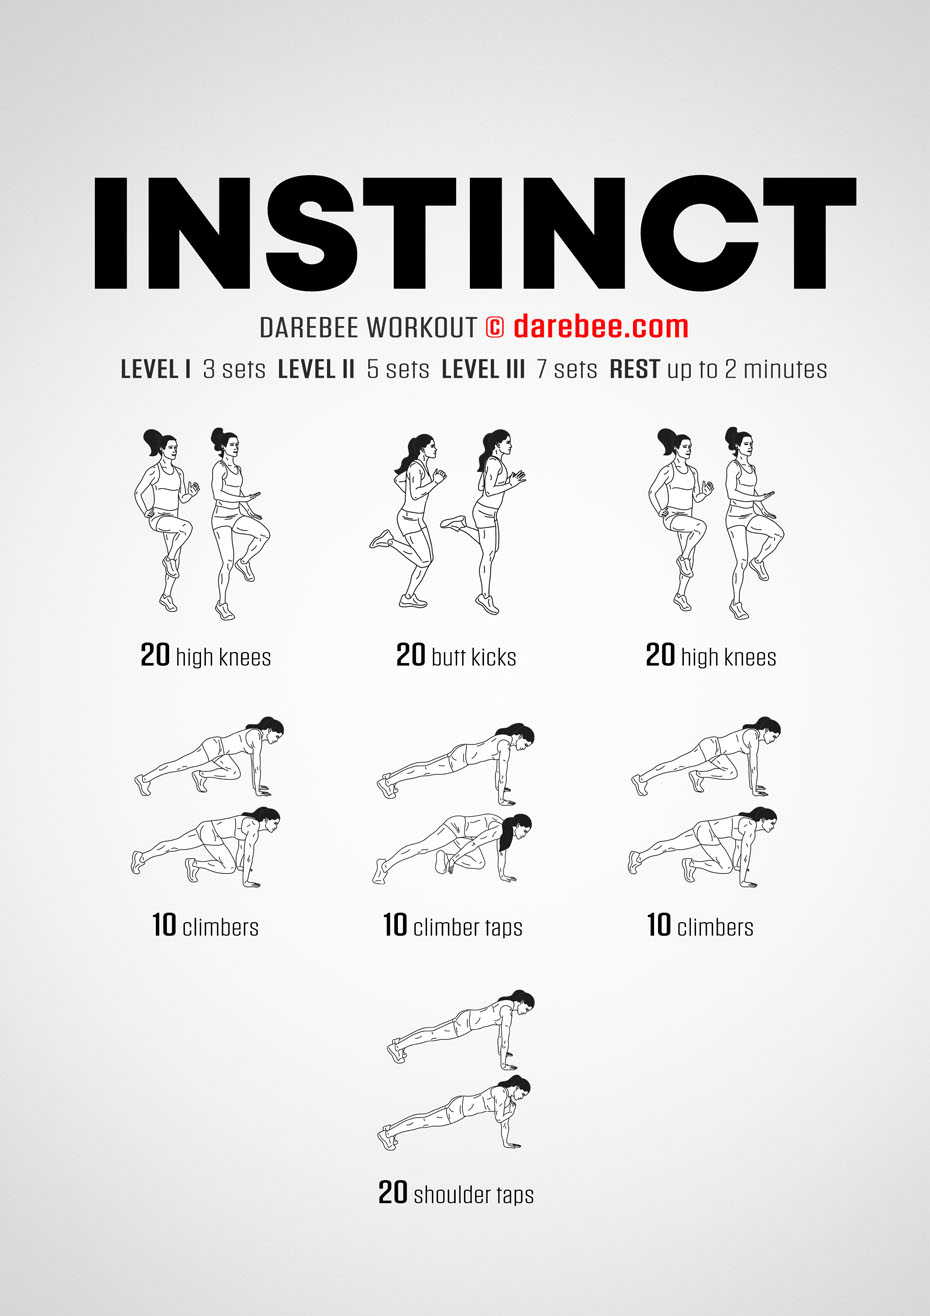 Instinct is a fast-moving, high-energy Darebee home-fitness workout that will get your lungs and heart working and will help you feel rejuvenated.